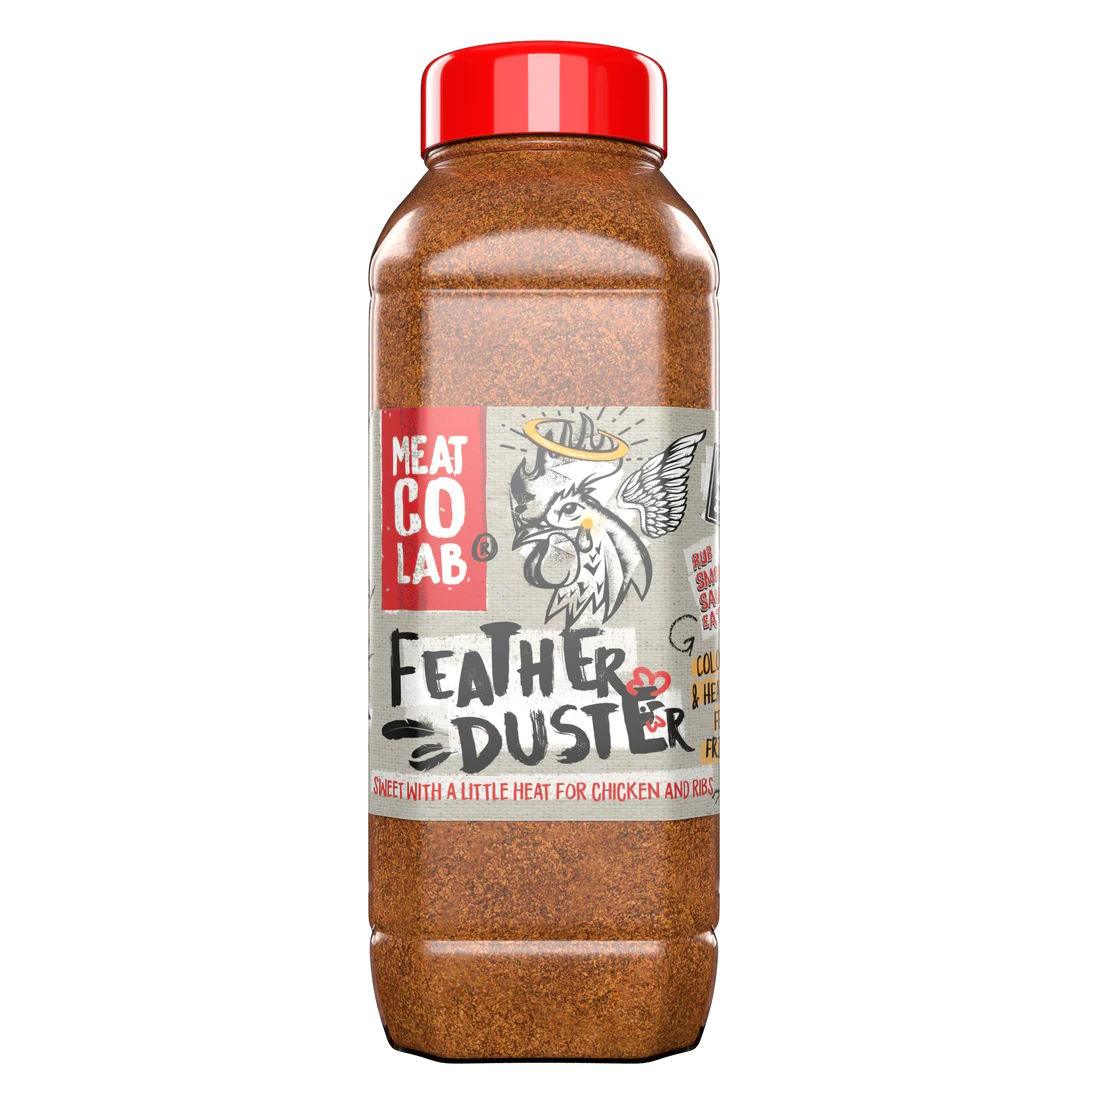 1.2kg Feather Duster BBQ Rub from Meat Co Lab - BBQ Land